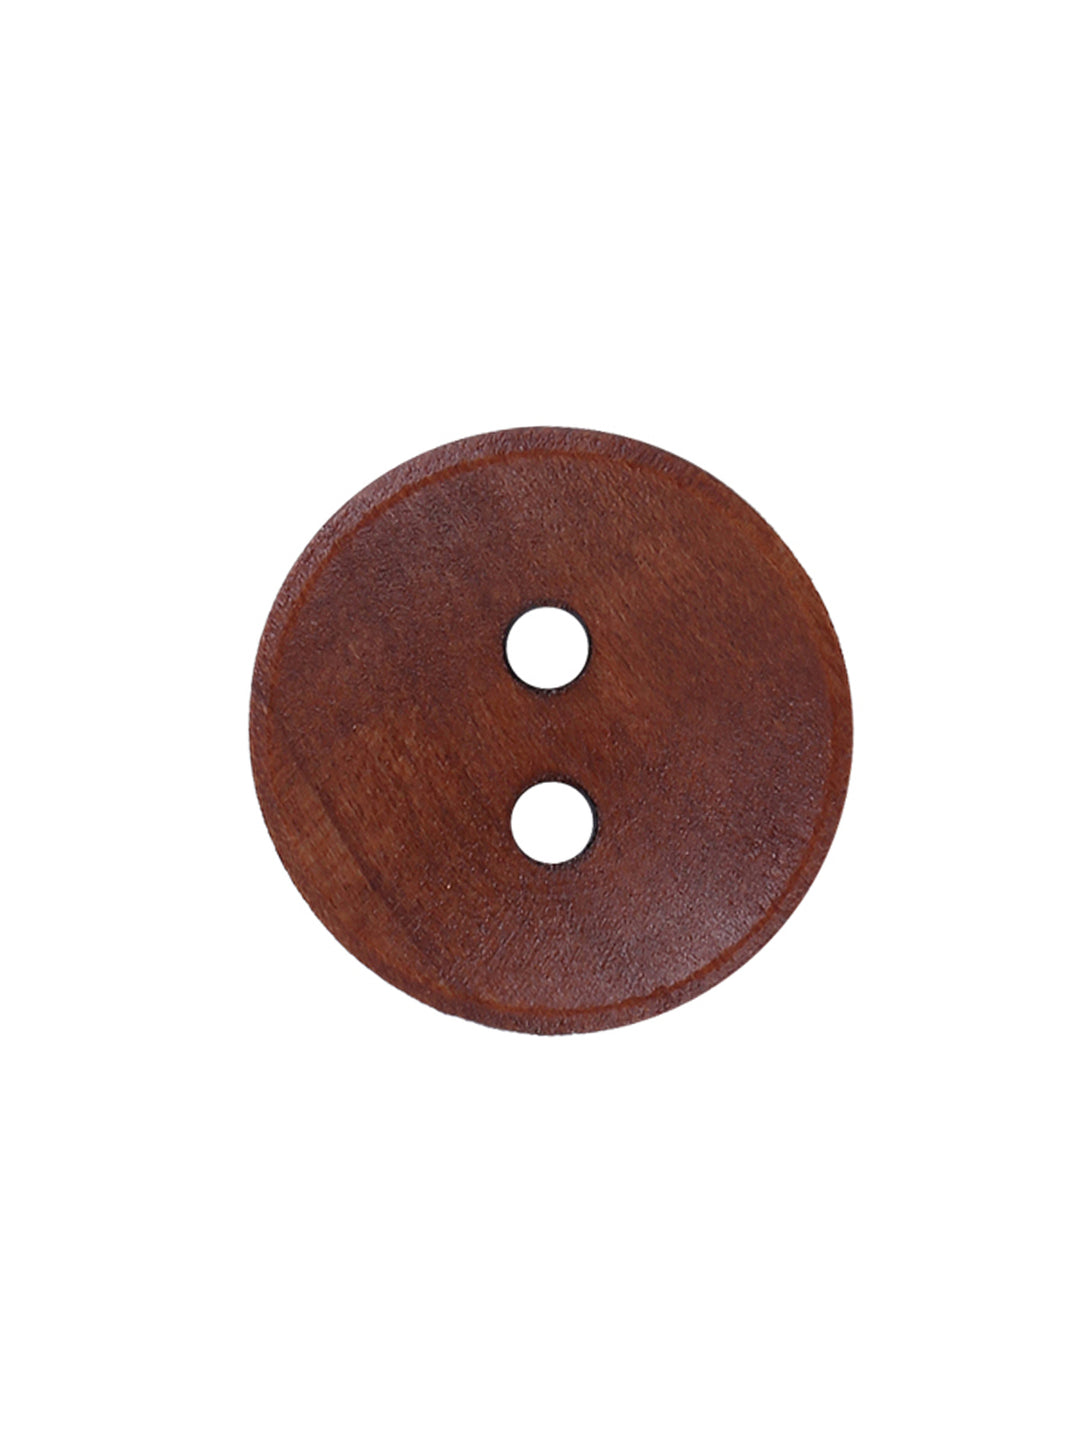 Round Shape Light Brown Color 2 Hole Hollow Wooden Button